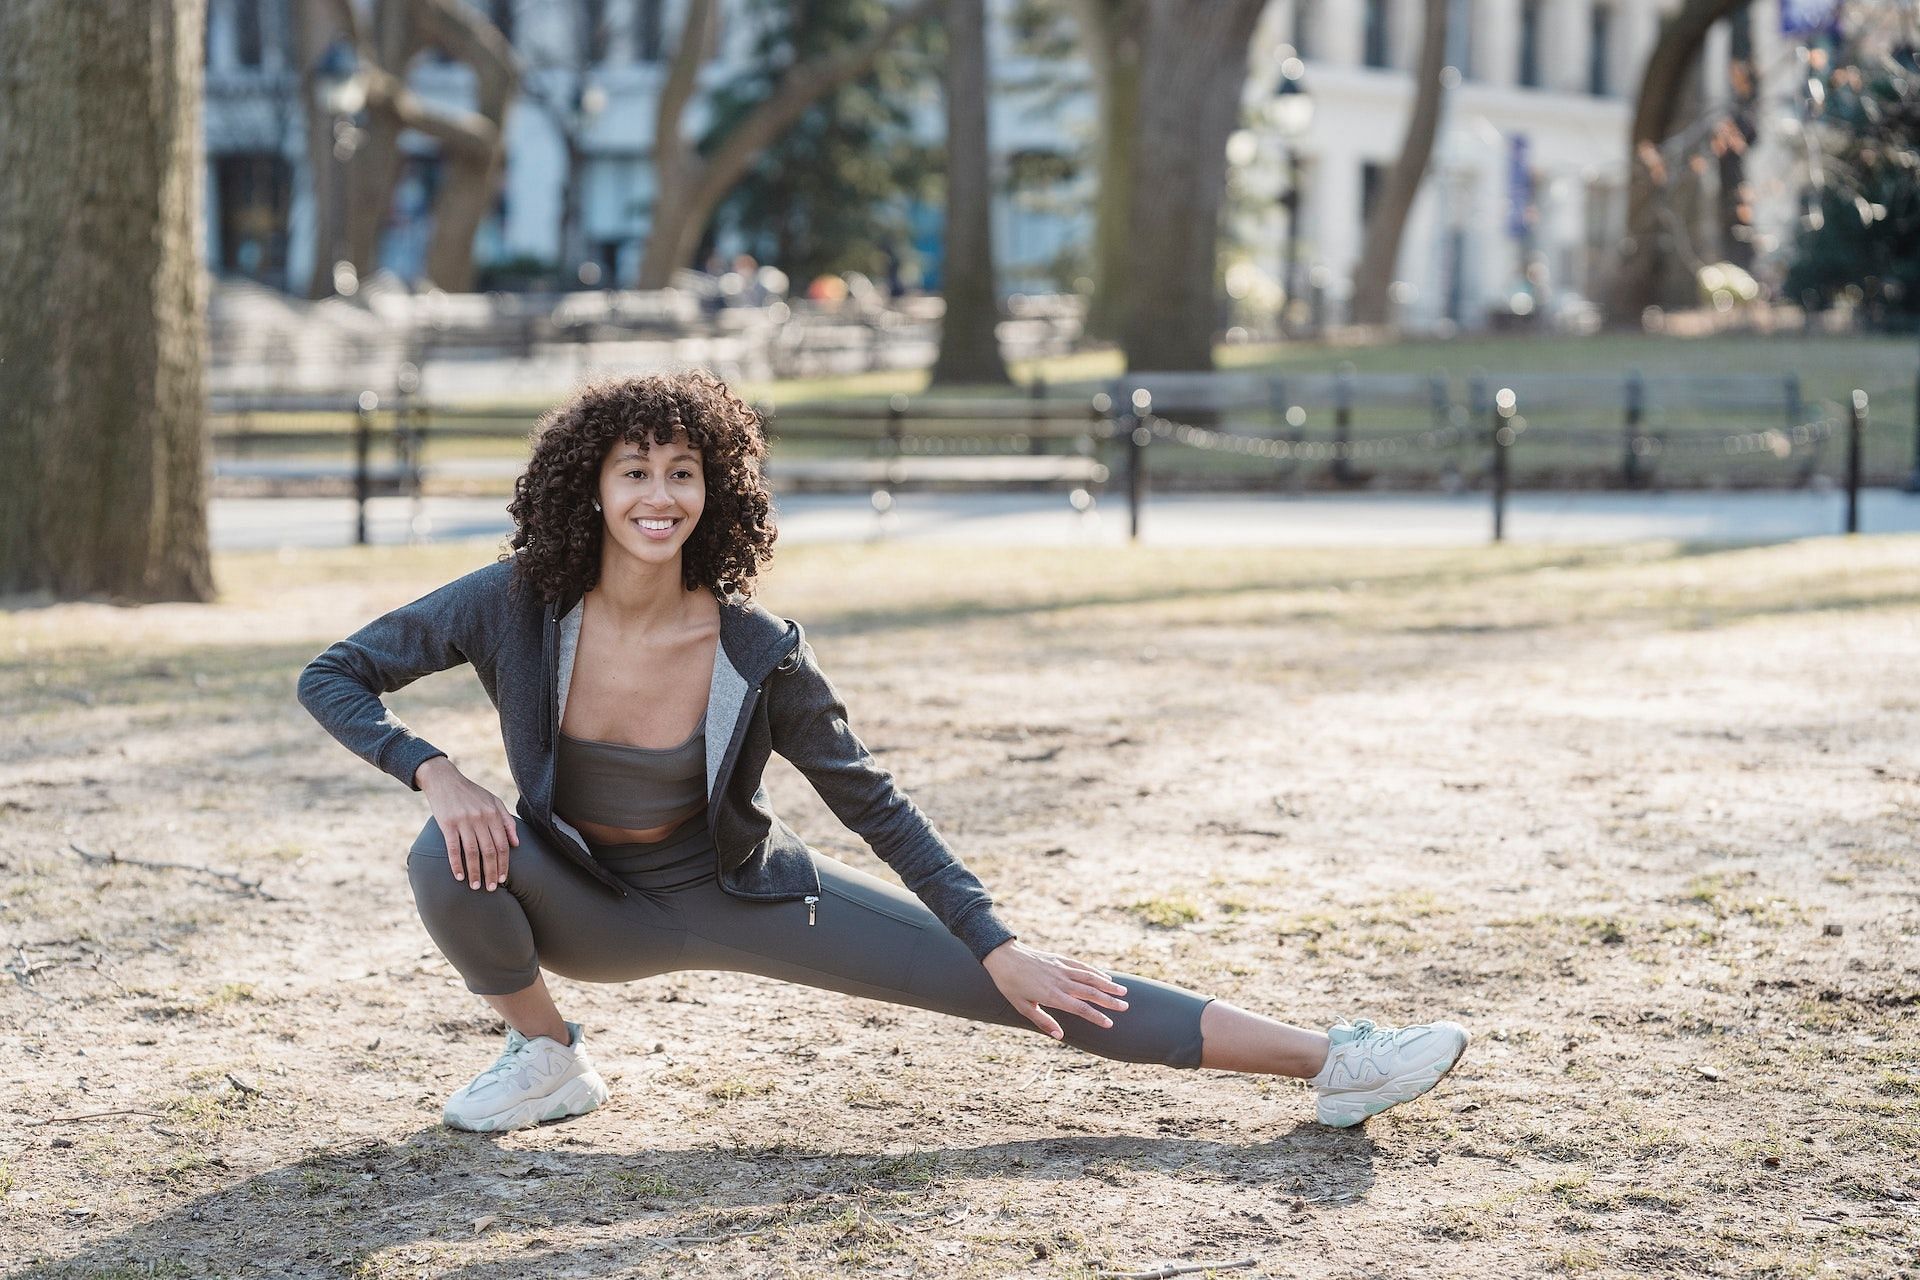 Hip stretches strengthen the hips and surrounding muscles. (Photo via Pexels/Blue Bird)